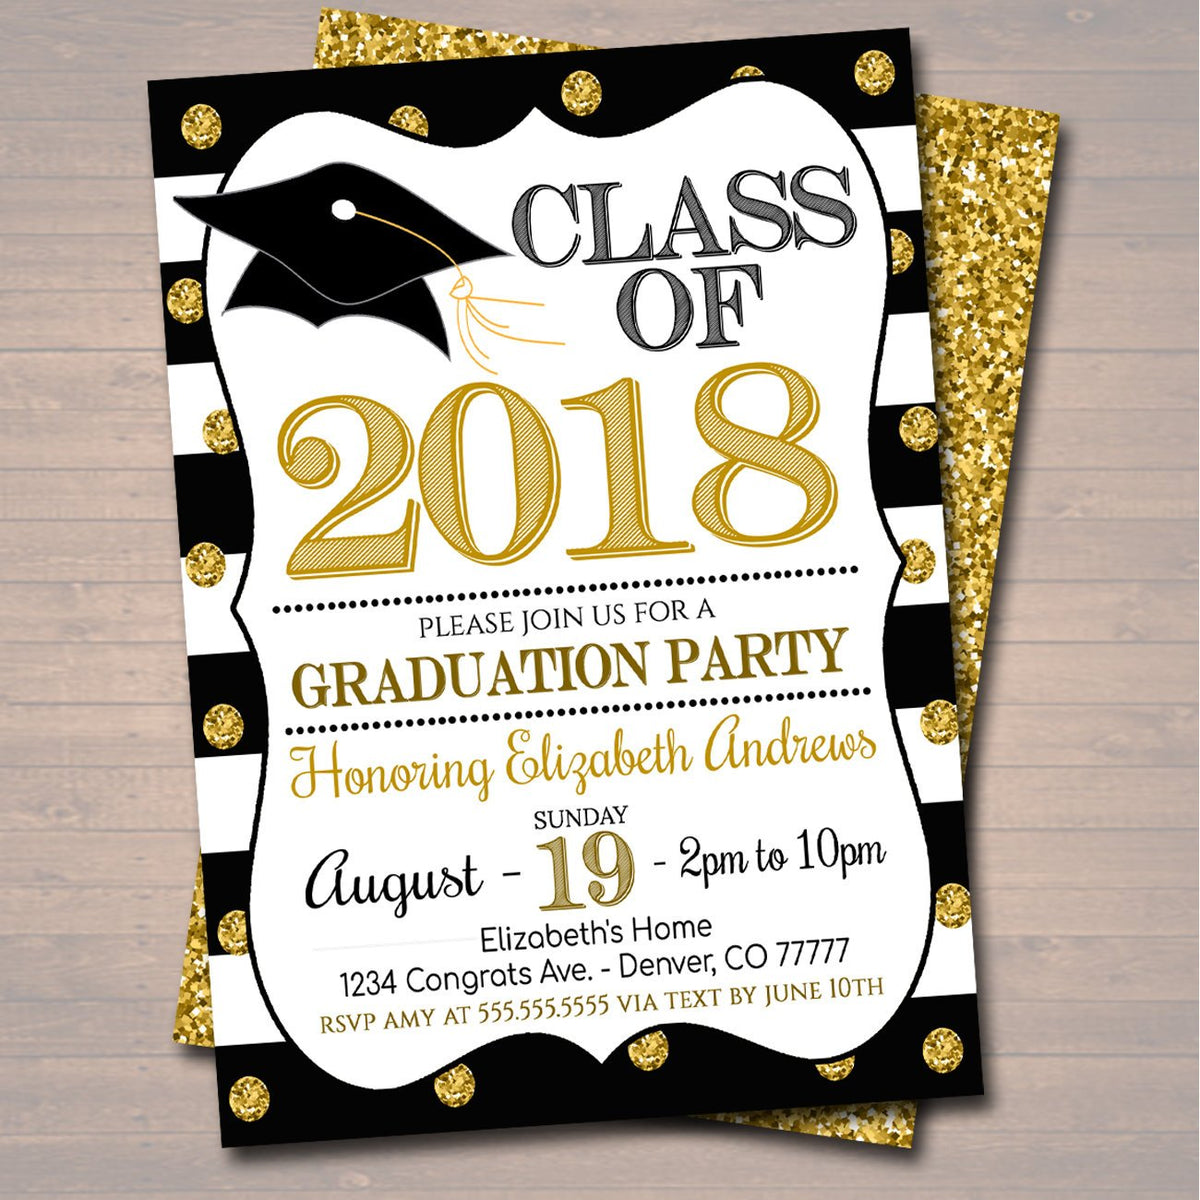 templates-for-graduation-party-invitations-business-template-ideas